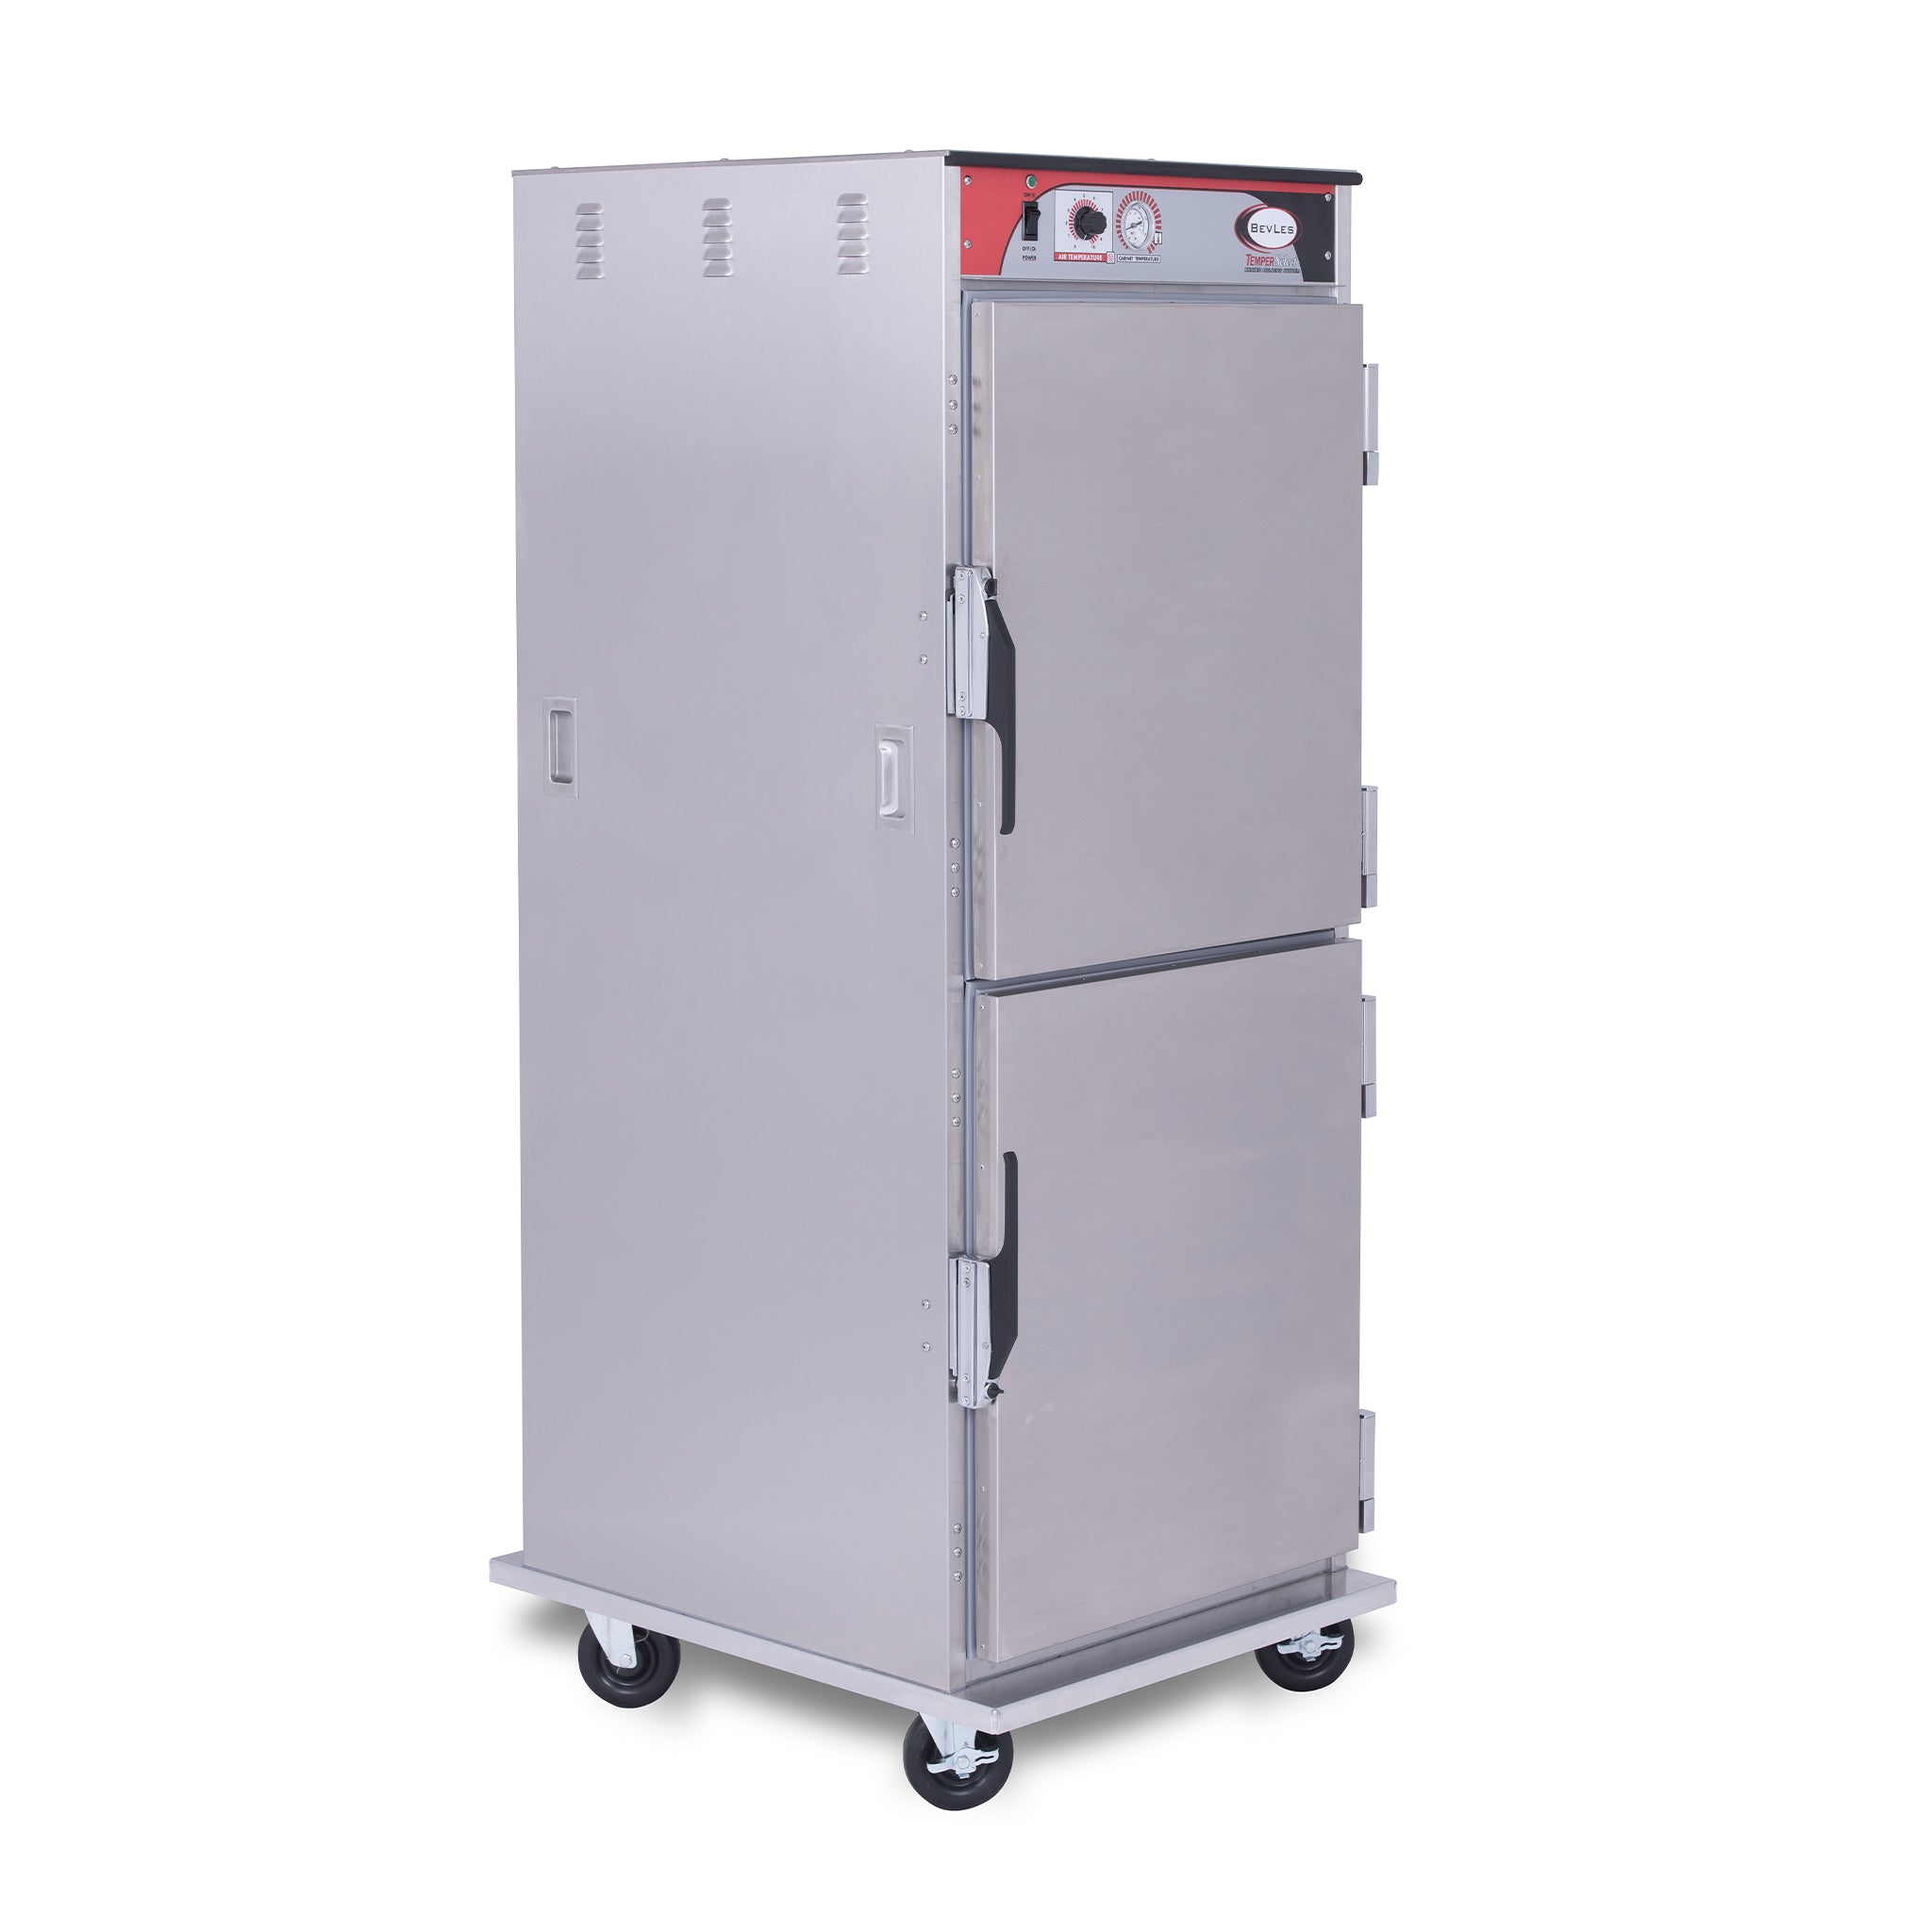 BevLes - HTSS74P161-PT, BevLes Temper Select - Pass Thru Full Size Heated Holding Cabinet, Narrow Width, 115V, in Silver